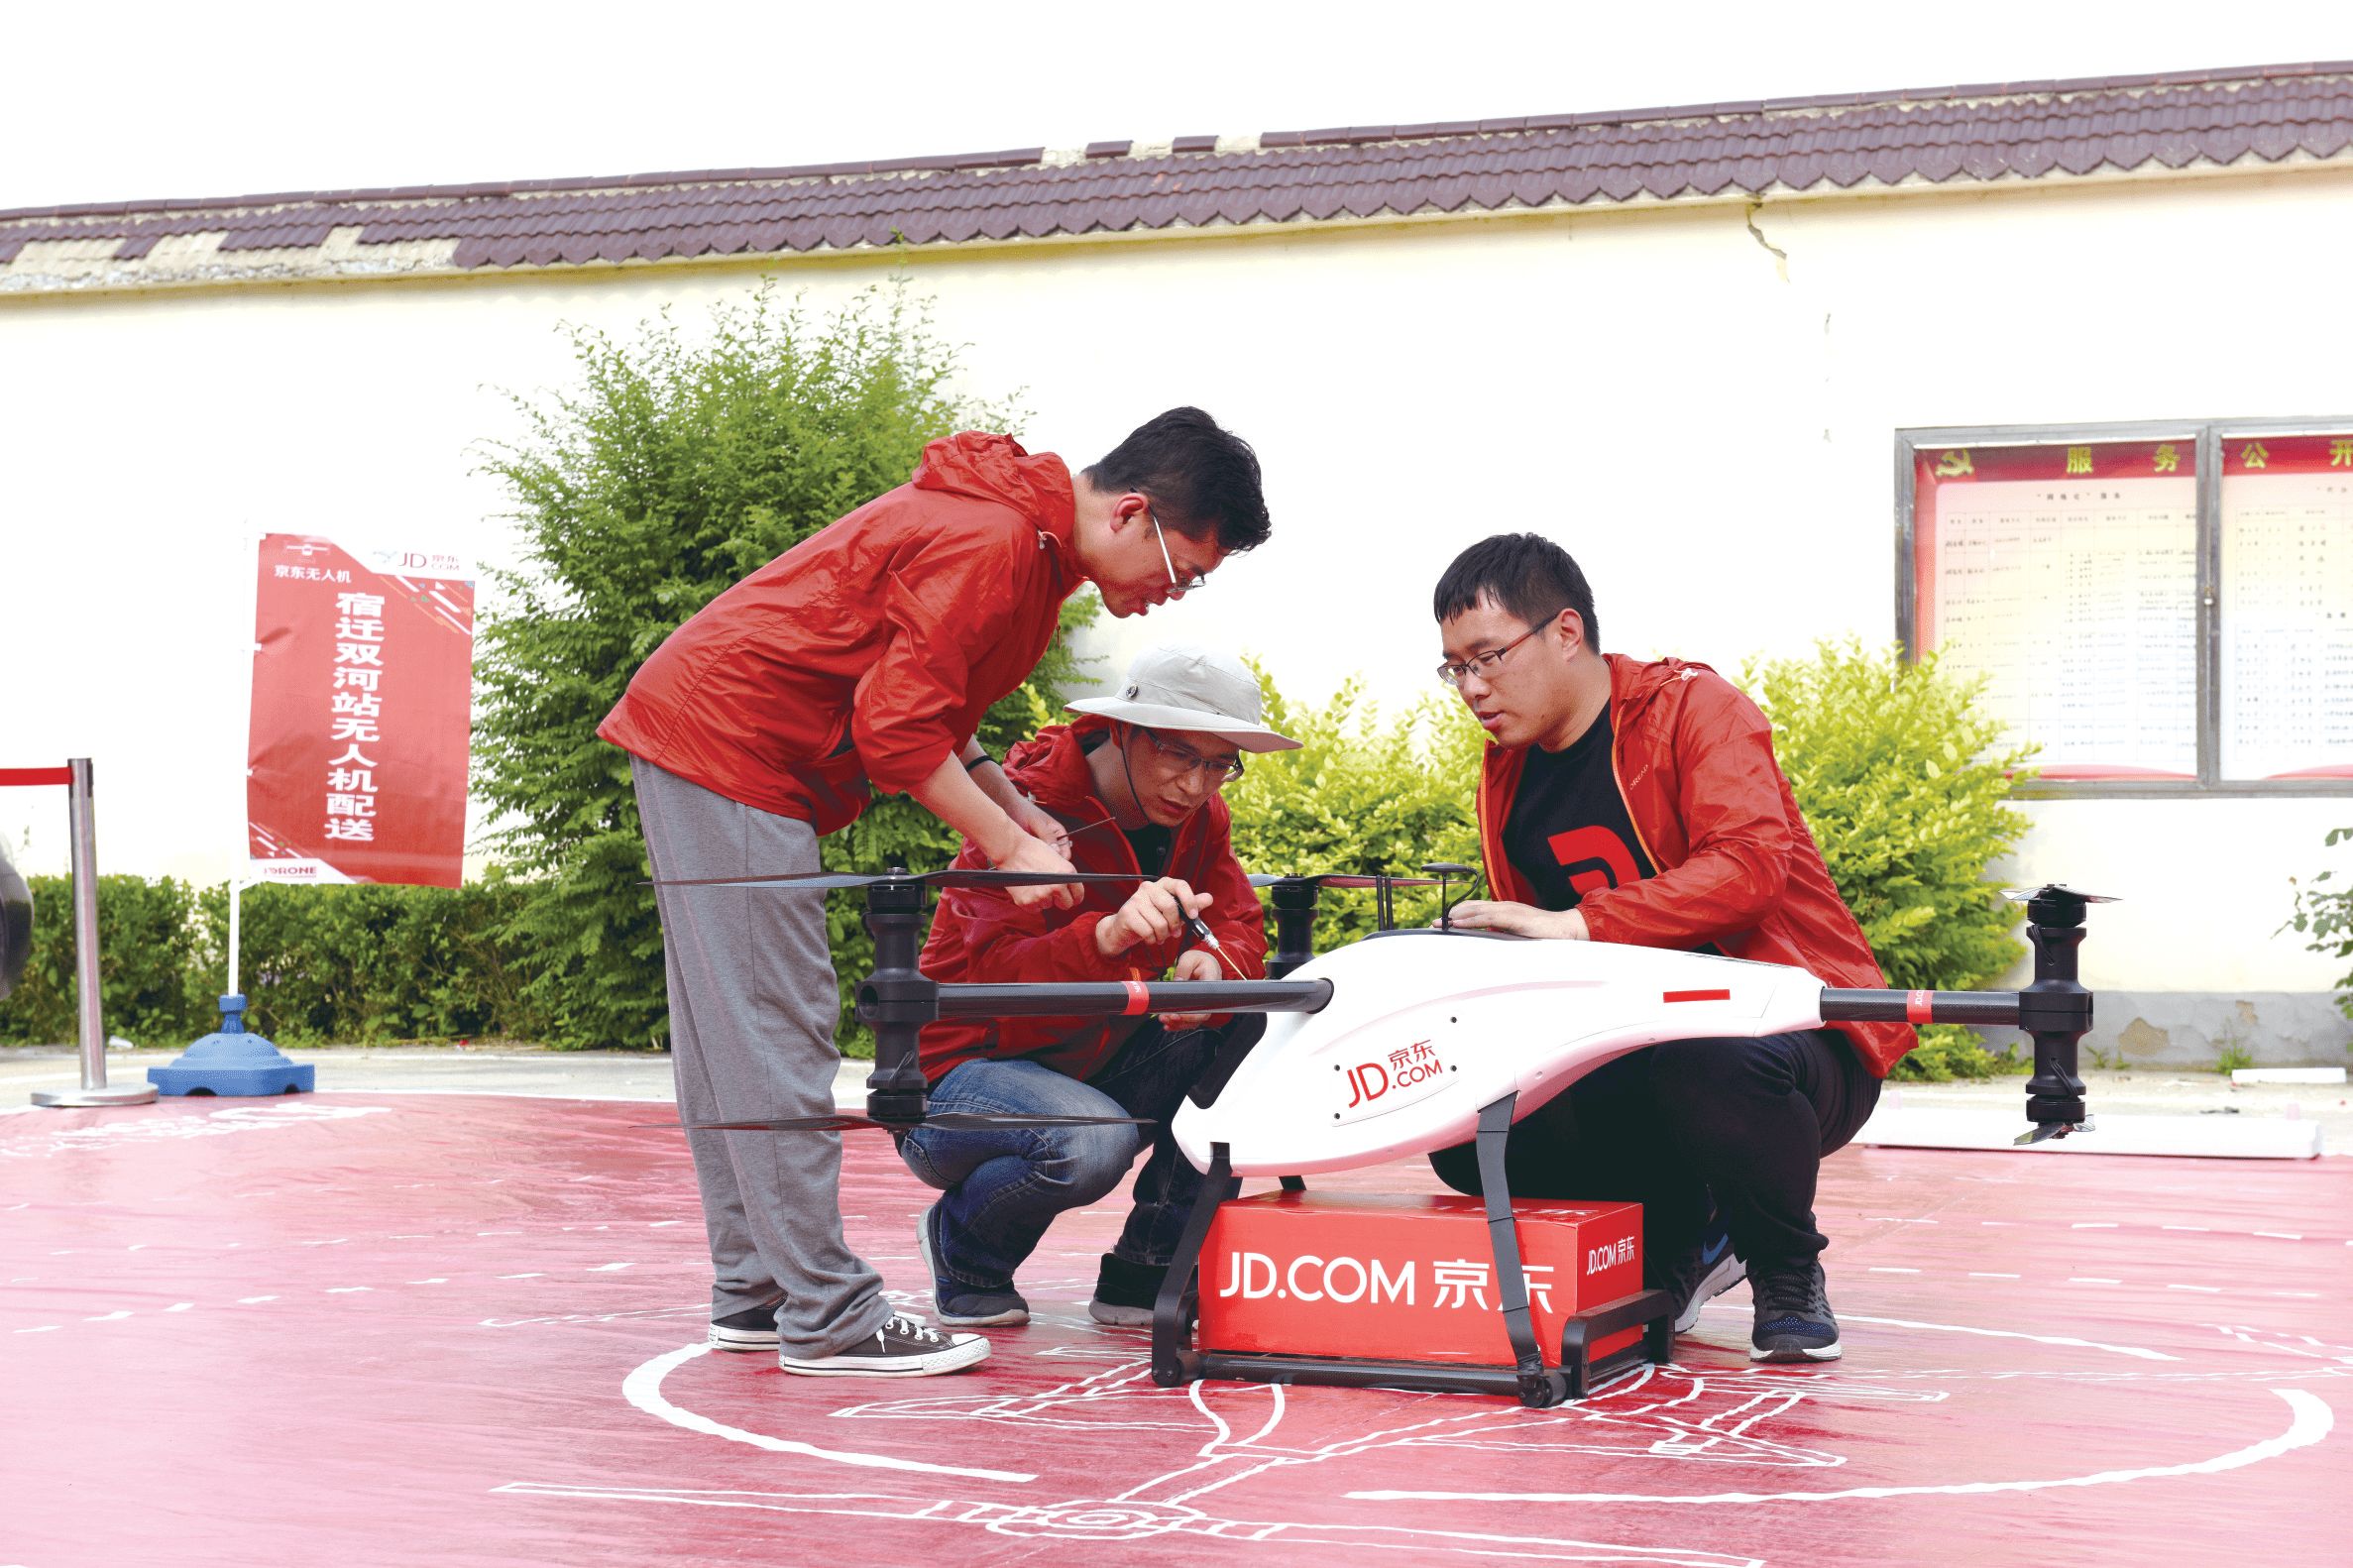 Staff from JD.com using drones to deliver parcels to rural shoppers [Photo: news.zol.com.cn]